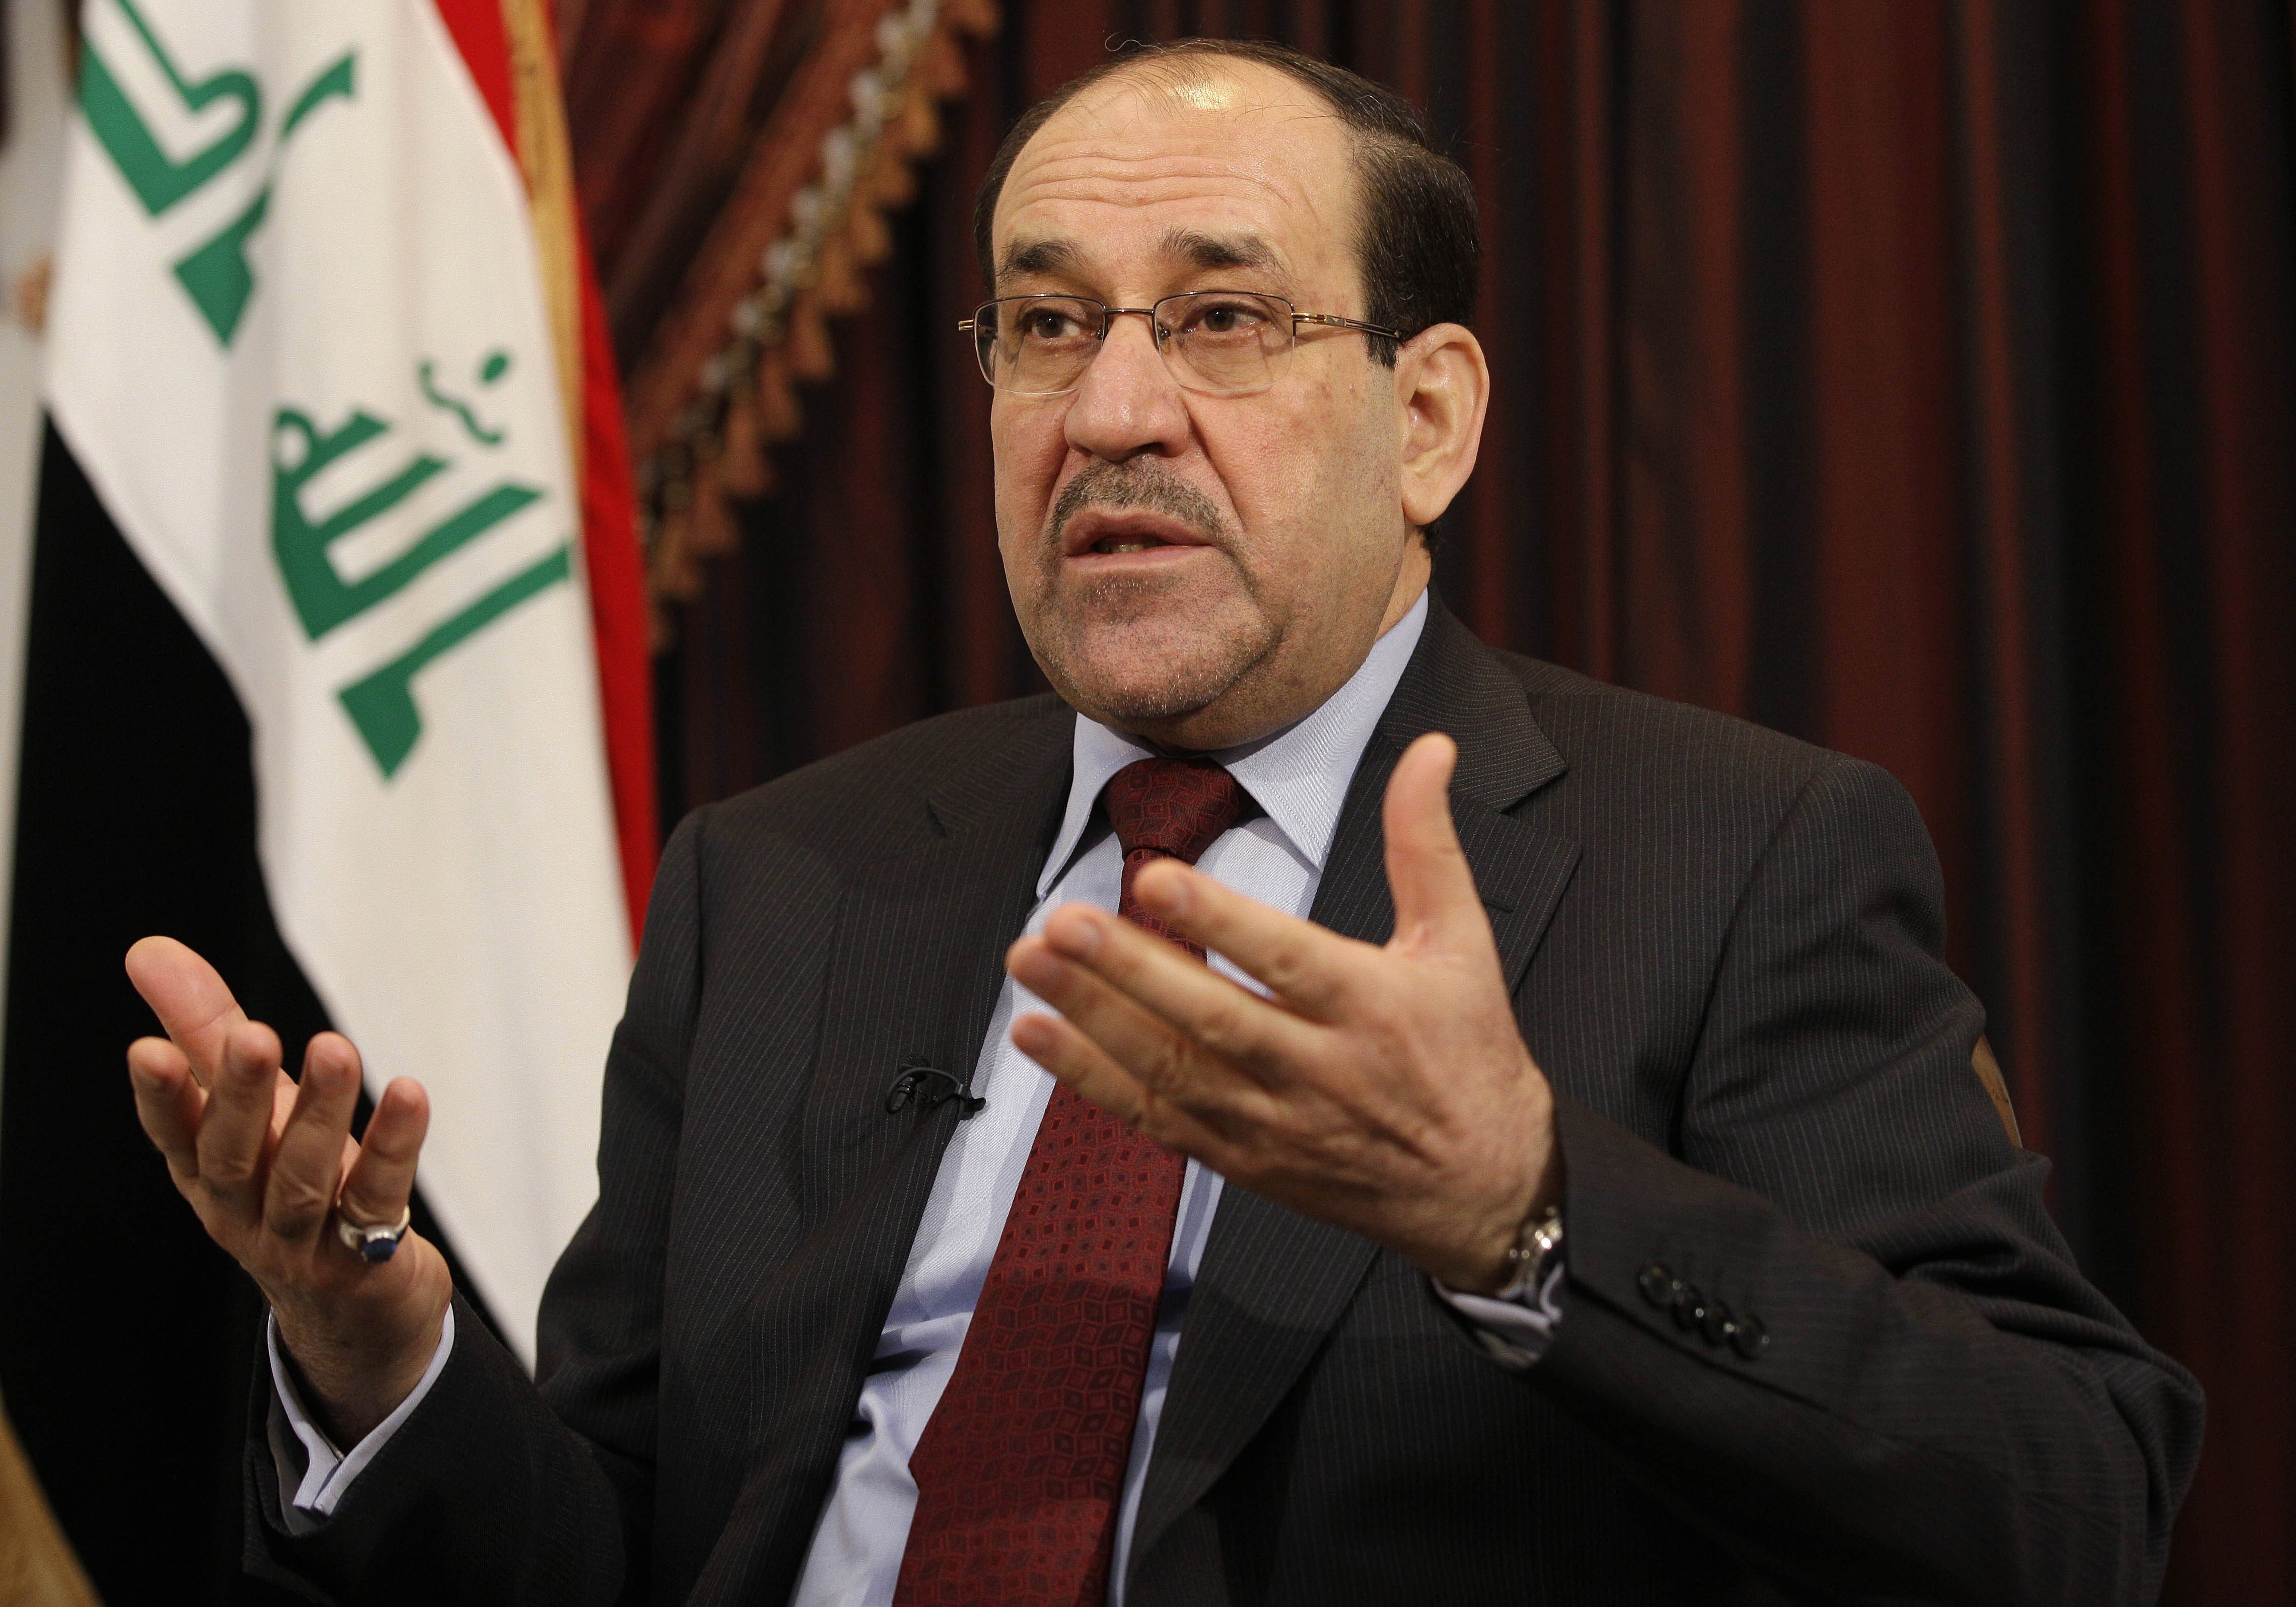 Iraq's Prime Minister Nouri al-Maliki speaks during an interview with the Associated Press in Baghdad on Dec. 3, 2011 (Hadi Mizban—AP)